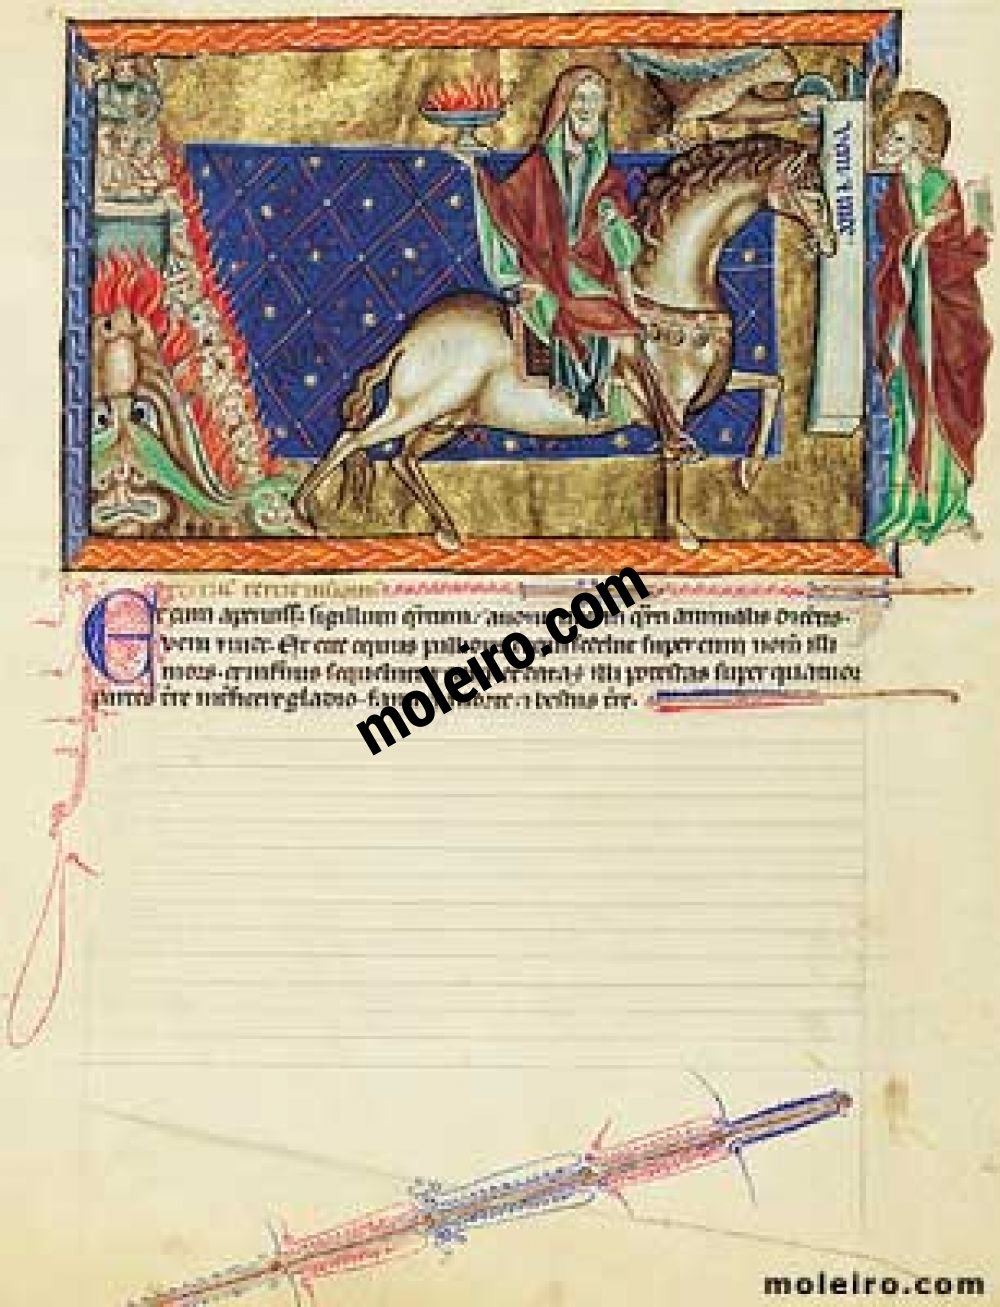 Gulbenkian Apocalypse f. 10v, The fourth seal: The rider on the pale horse